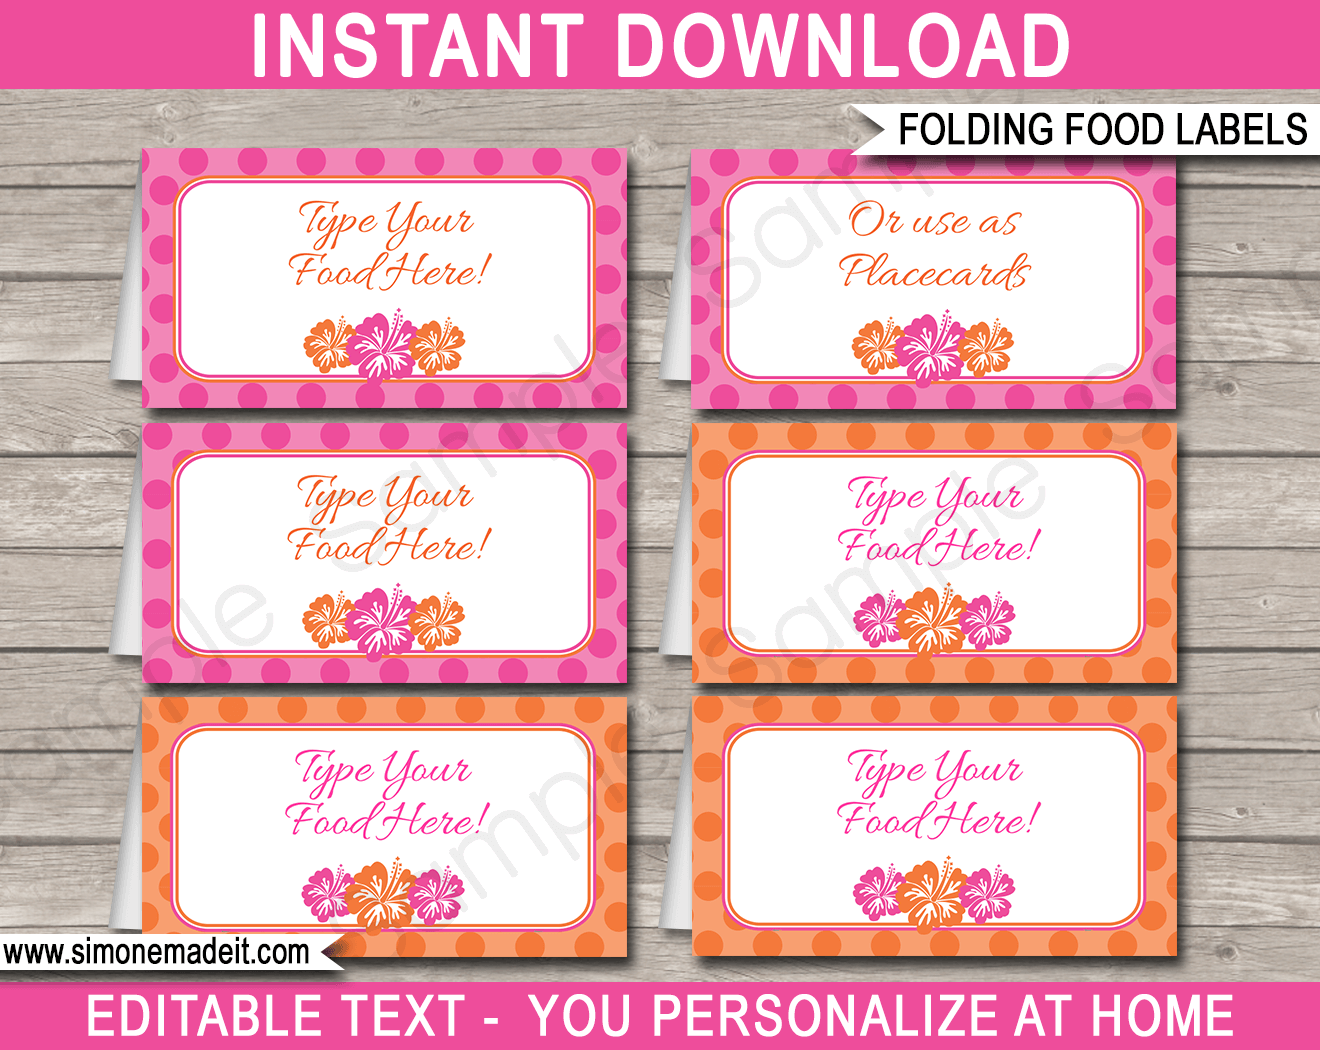 Printable Hawaiian Luau Party Food Labels | Food Buffet Tags | Tent Cards | Place Cards | Hawaiian Luau Theme Birthday Party Decorations | DIY Editable Template | Instant Download via simonemadeit.com